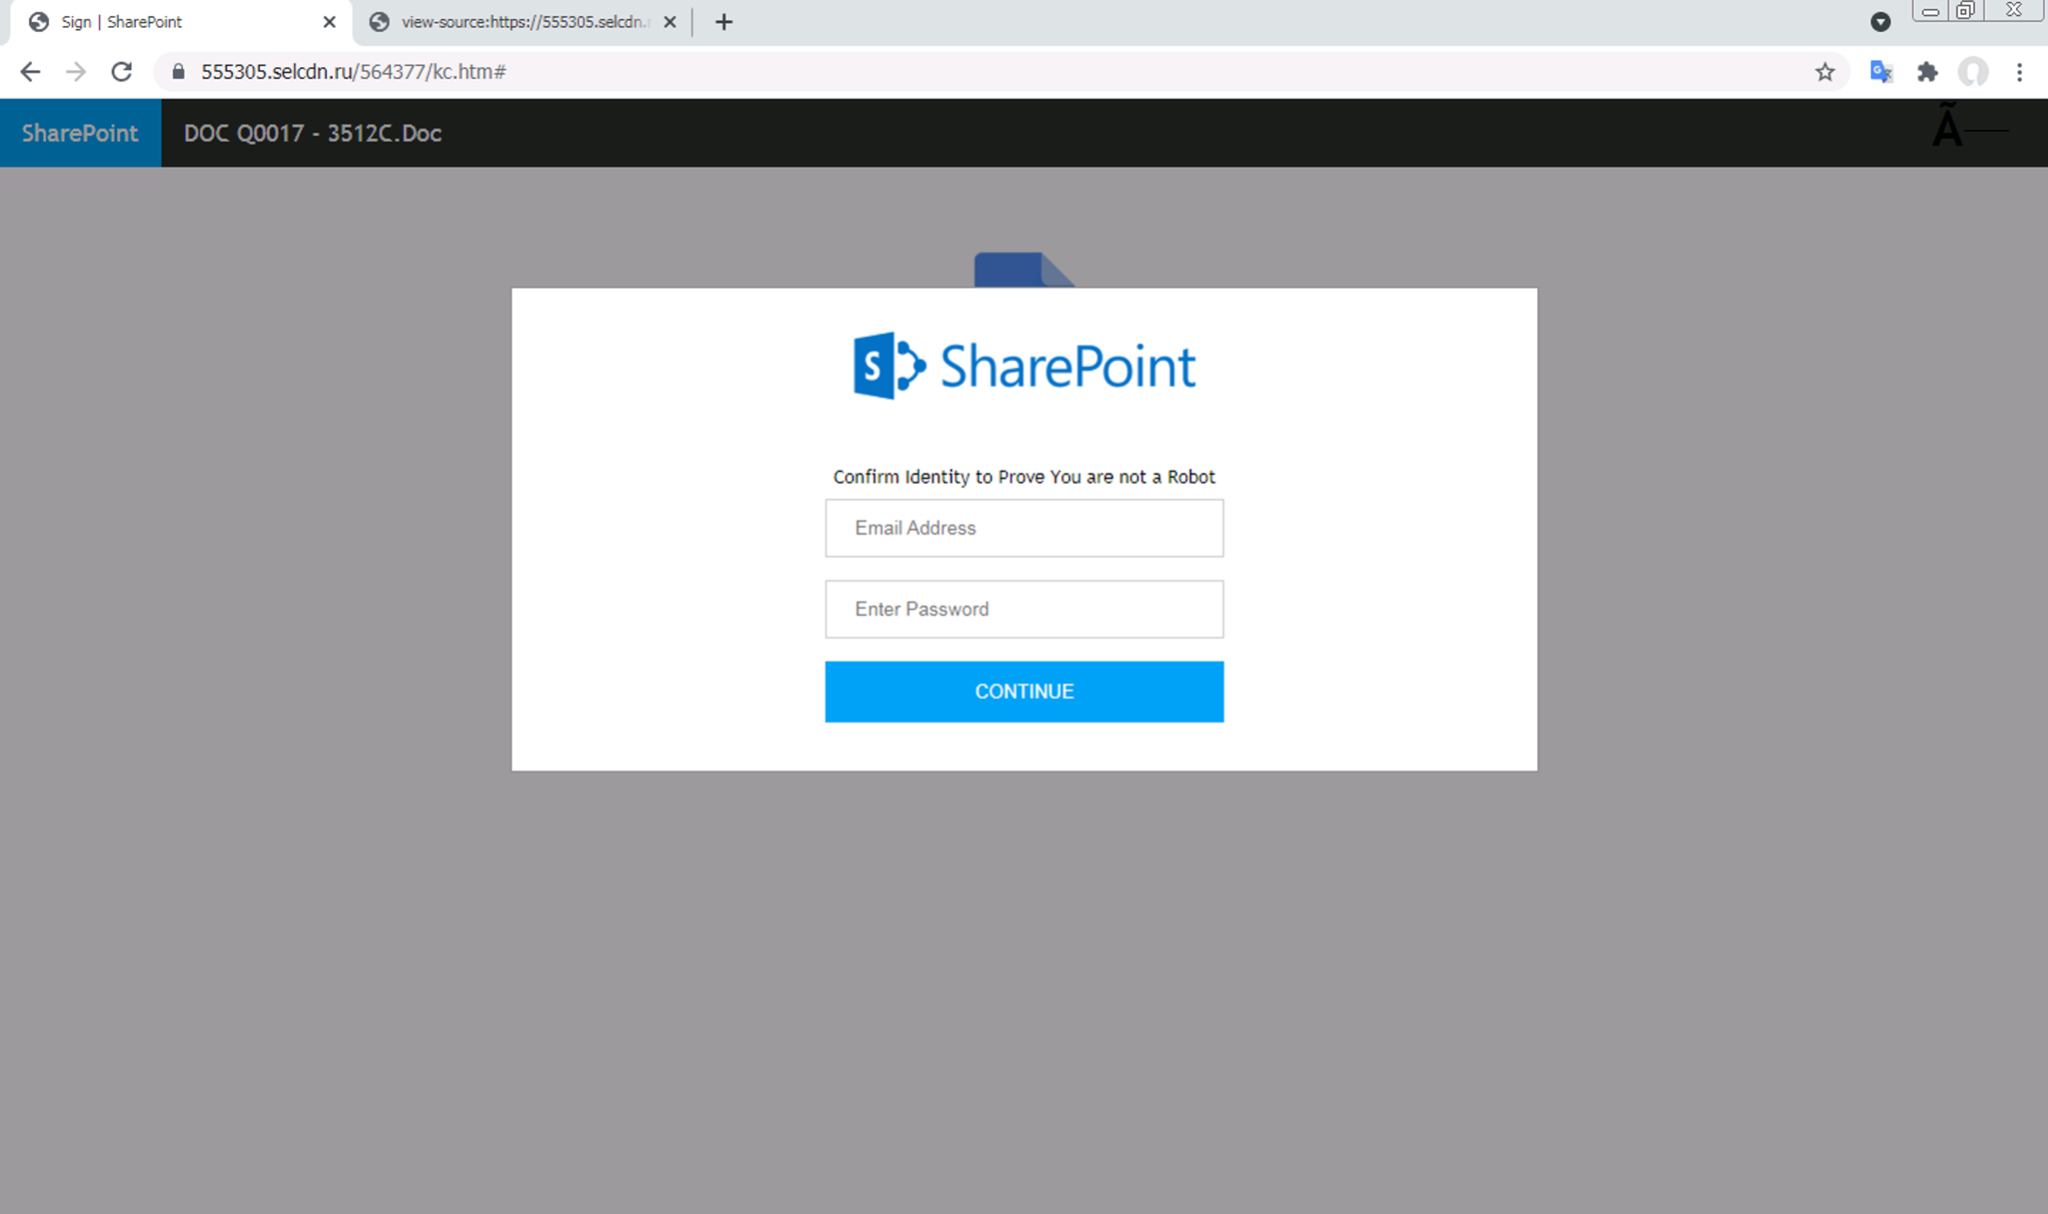 An example of JavaScript-based phishing. The entire page shown in the screenshot, impersonating a SharePoint login page, is generated using a single JavaScript script tag. 